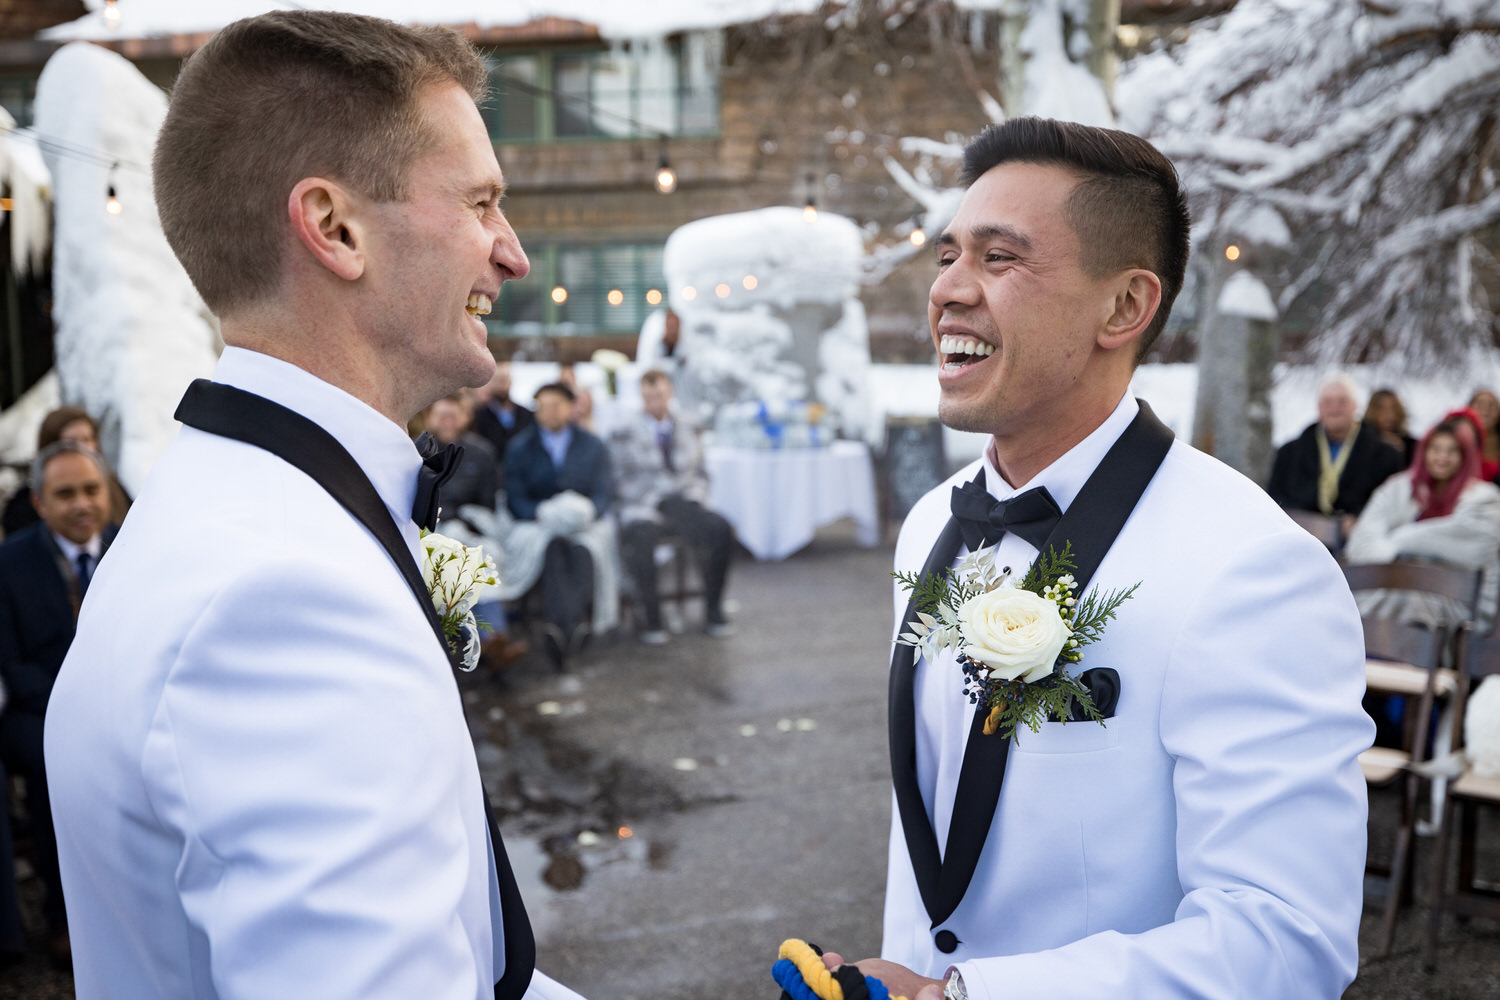 Two grooms that decided to get married during winter in Lake Tahoe enjoy a sweet moment during their ceremony.